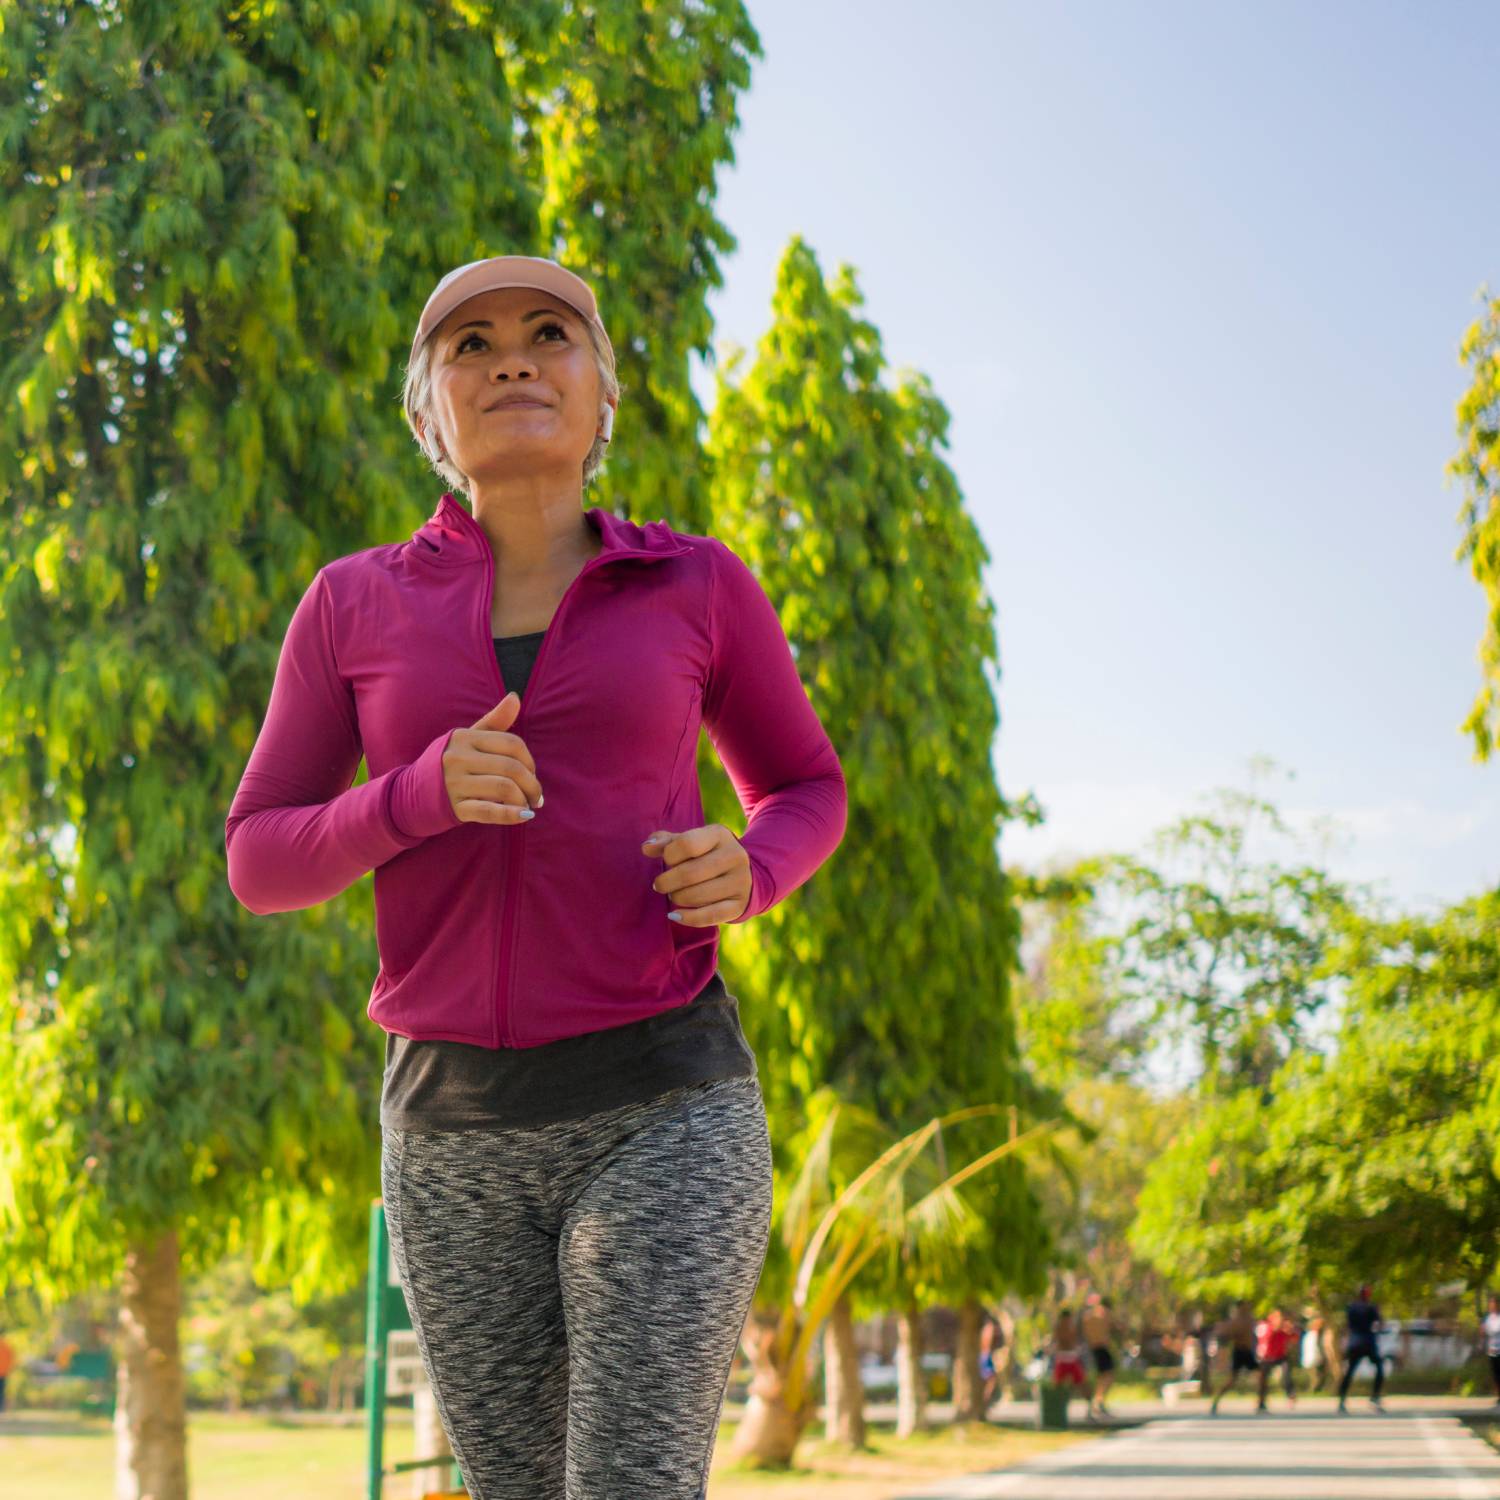 A middle-aged woman in a pink workout shit running through a city park on a sunny day.